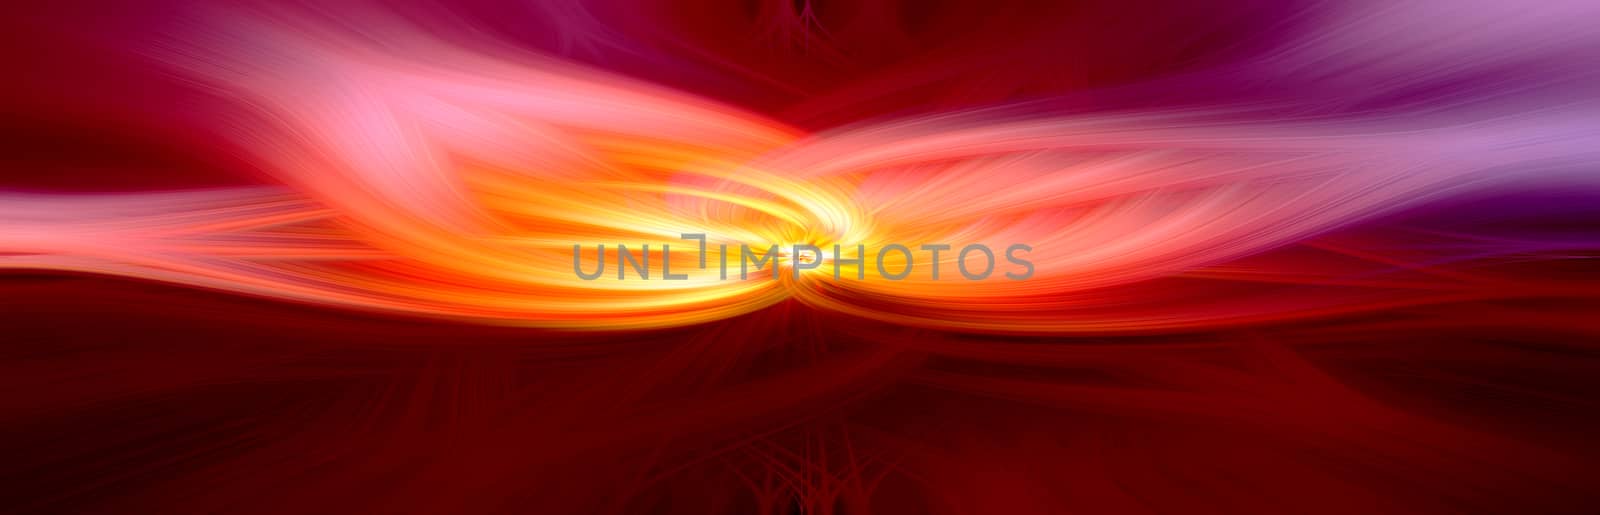 Beautiful abstract intertwined 3d fibers forming an ornament out of various symmetrical shapes. Purple, pink, red, and yellow colors. Banner size. Illustration.